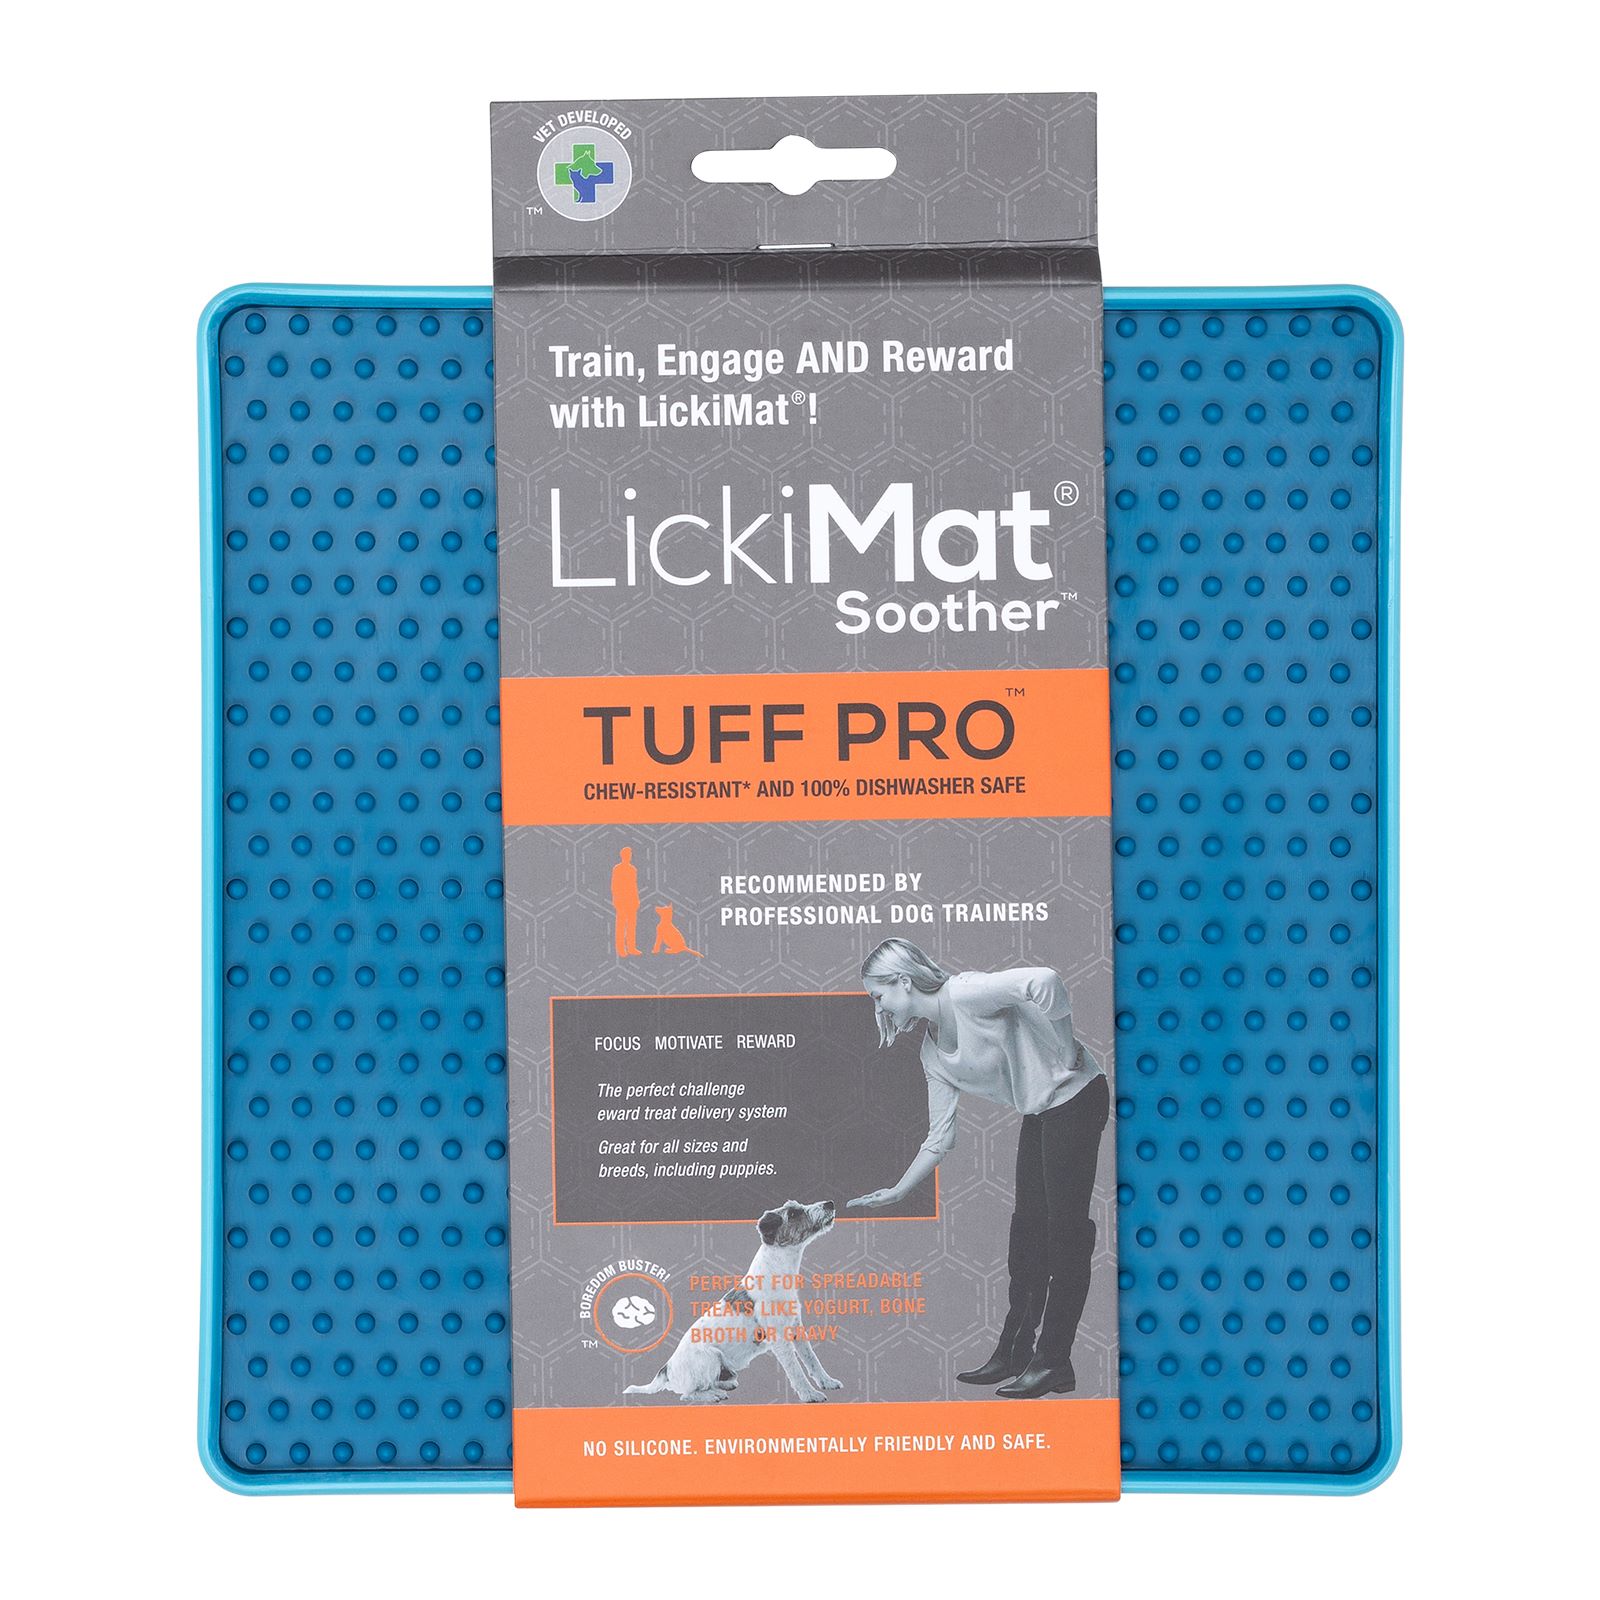 LickiMat Soother PRO Tuff Slow Food Licking Mat for Dogs image 2